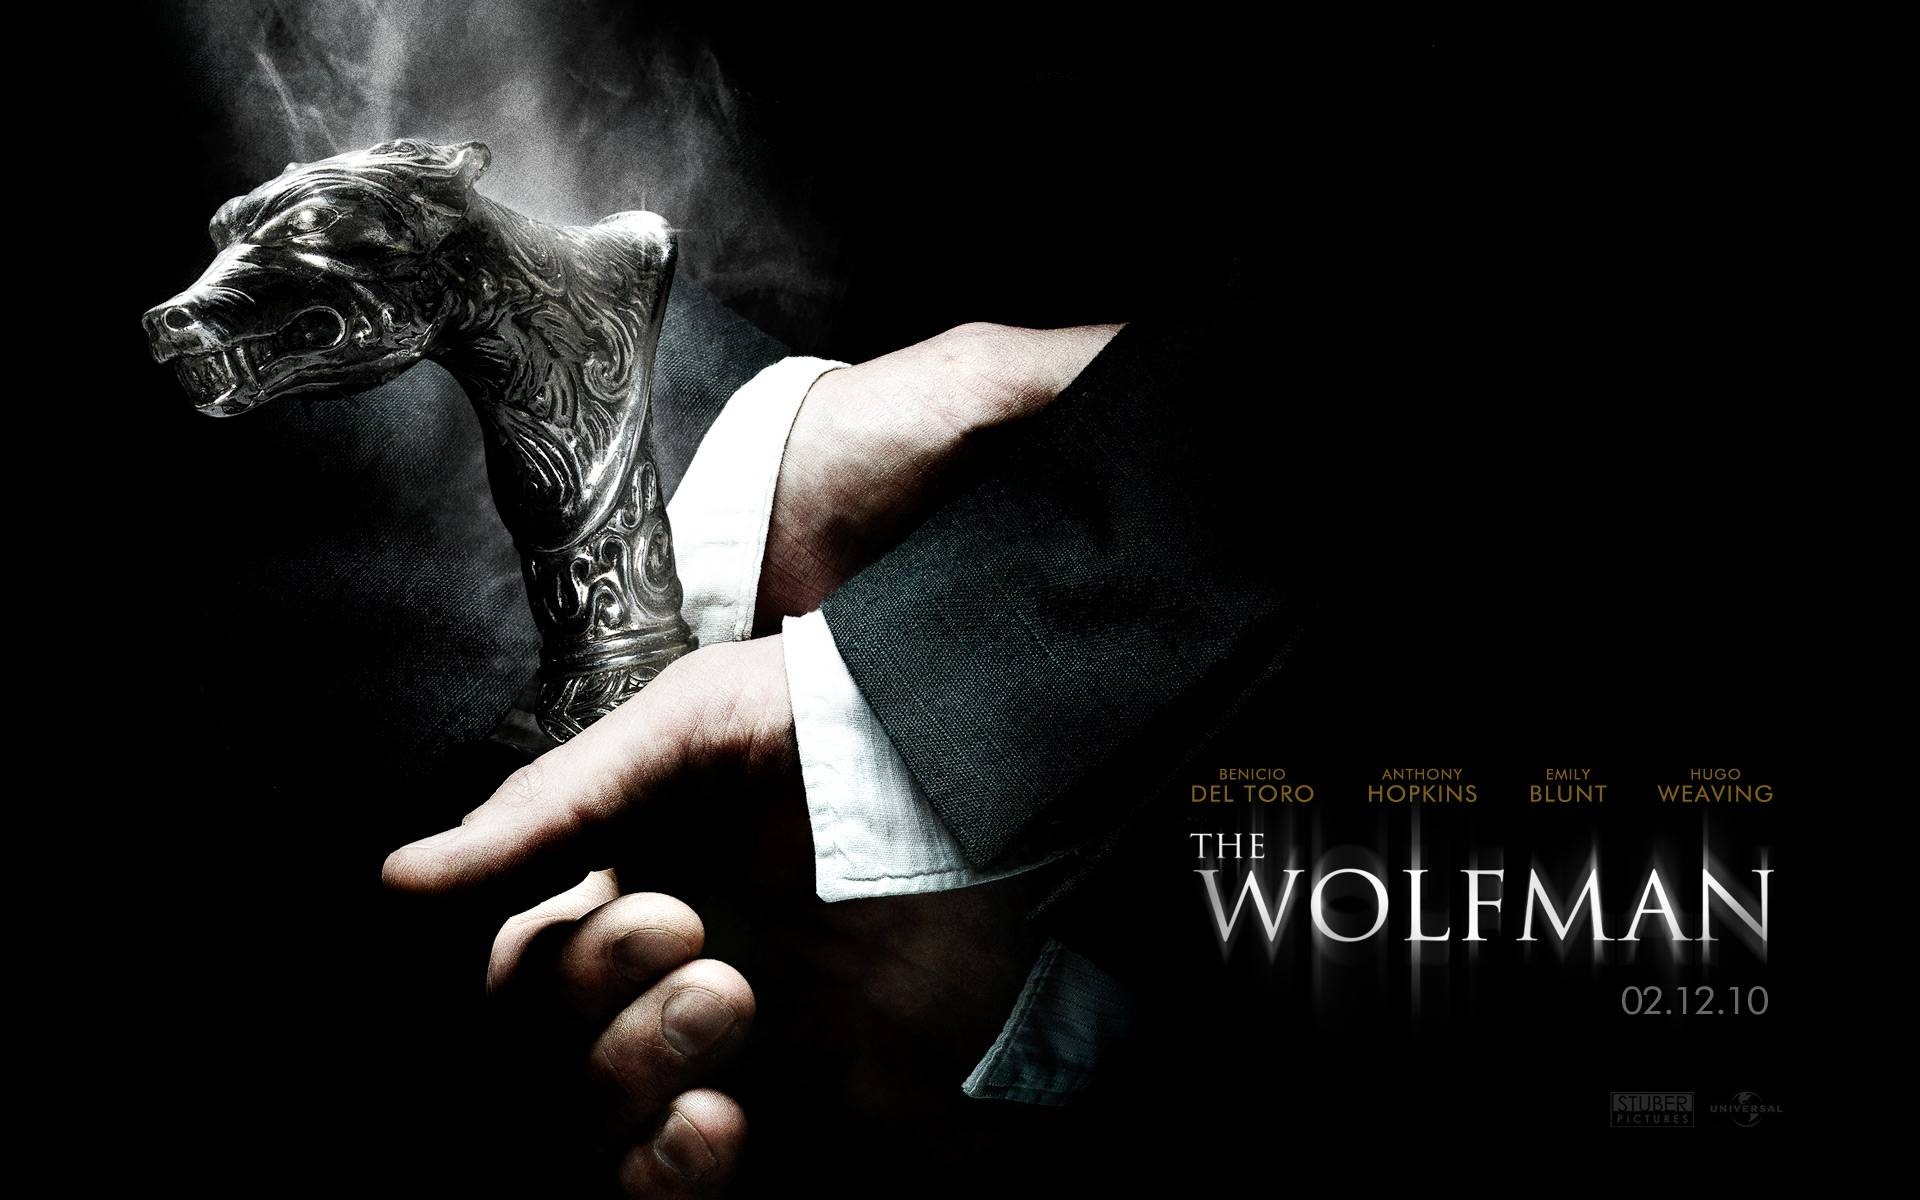 The Wolfman Movie Wallpapers #7 - 1920x1200